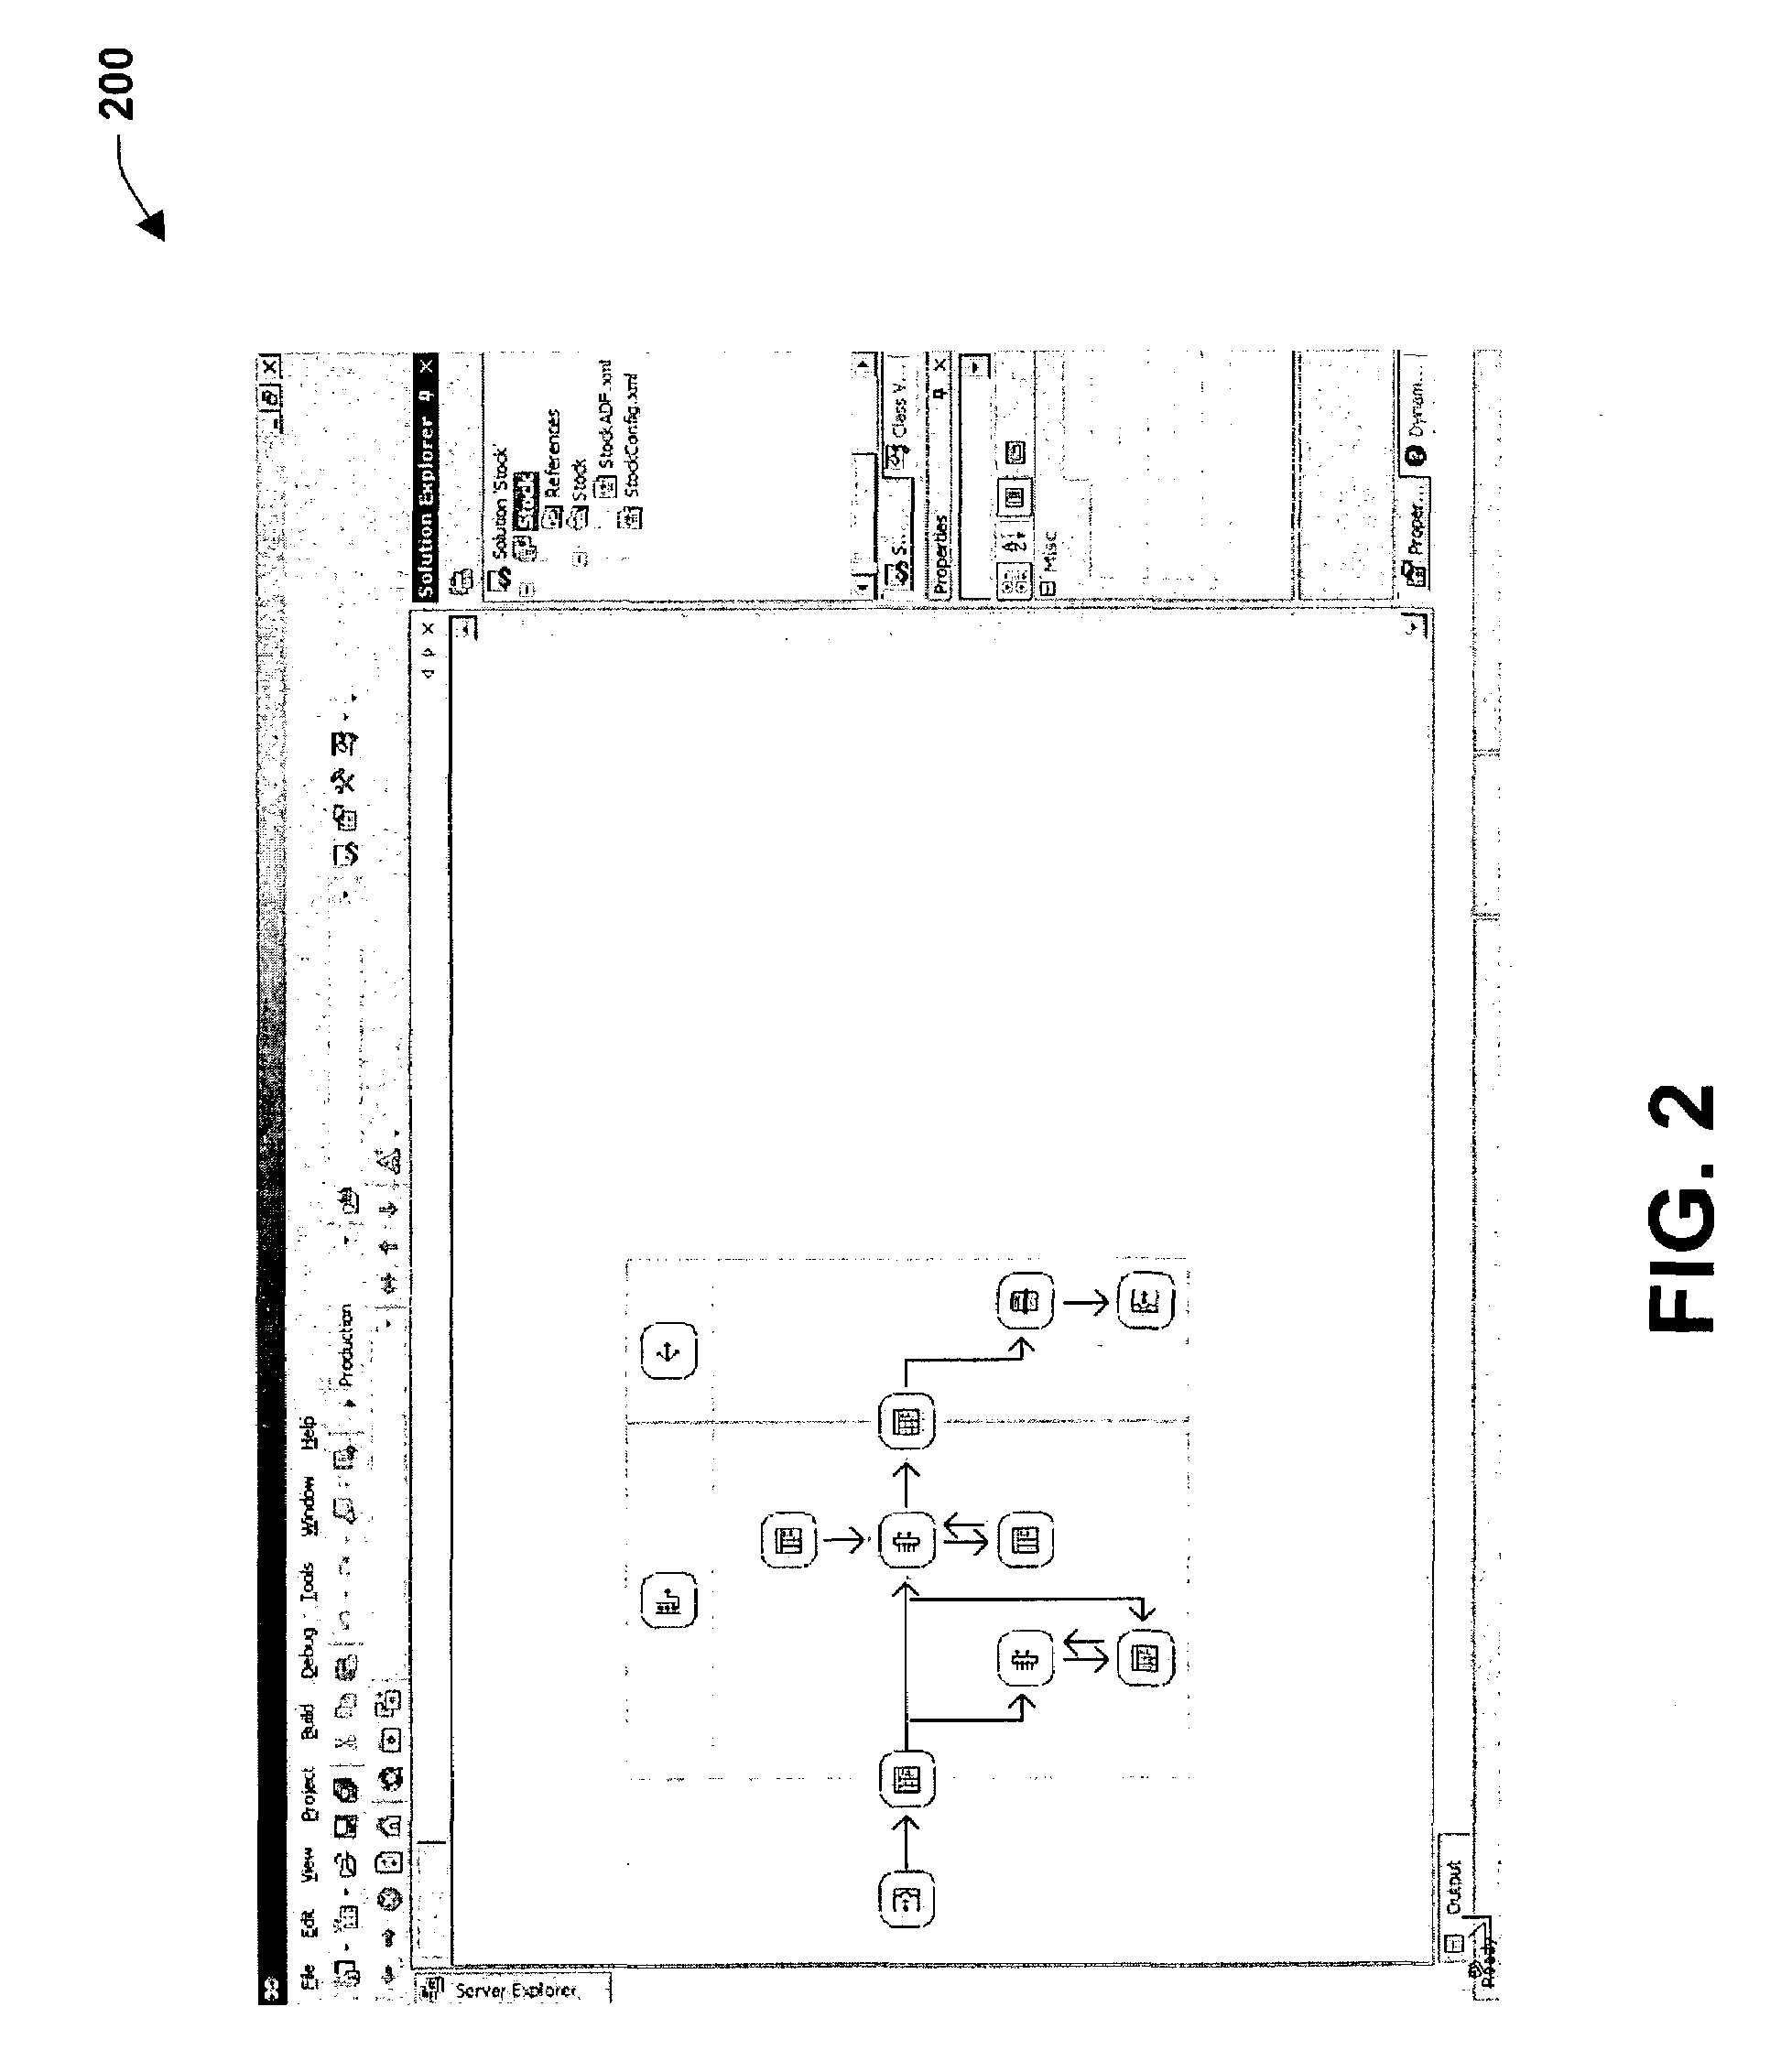 User interface system and methods for providing notification(s)